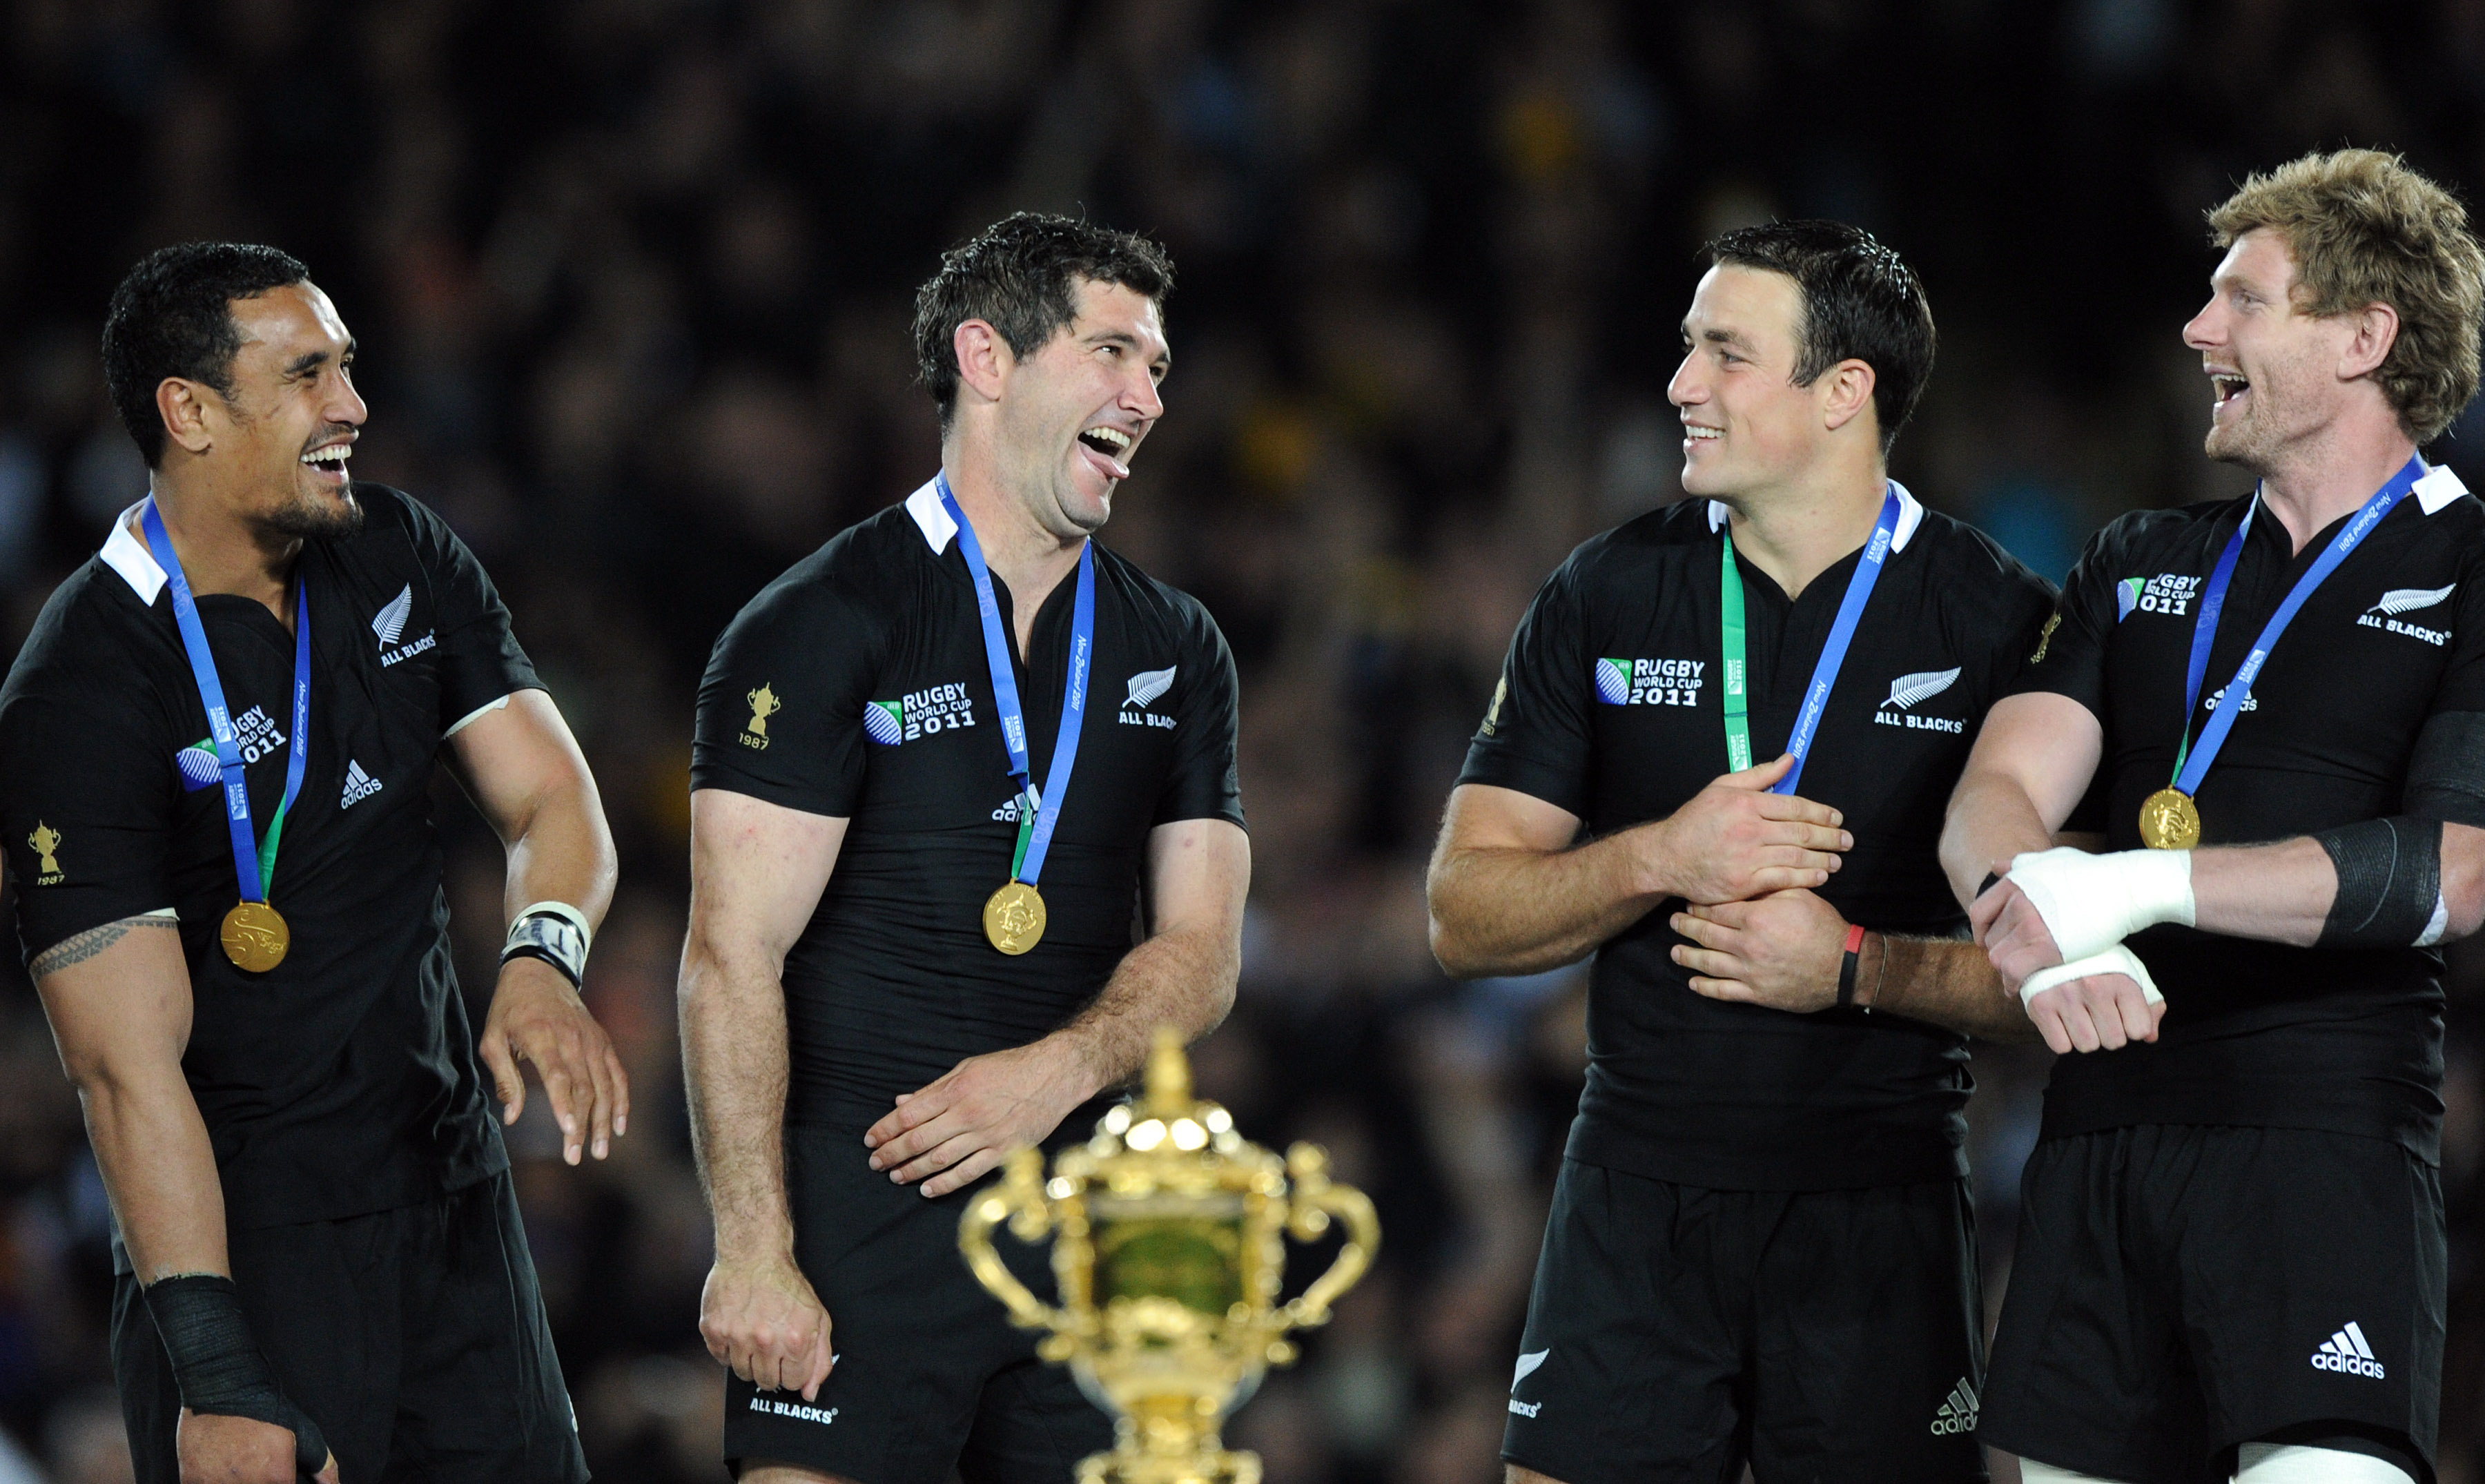 All Blacks crowned Rugby Championship Winners – RugbyRedefined